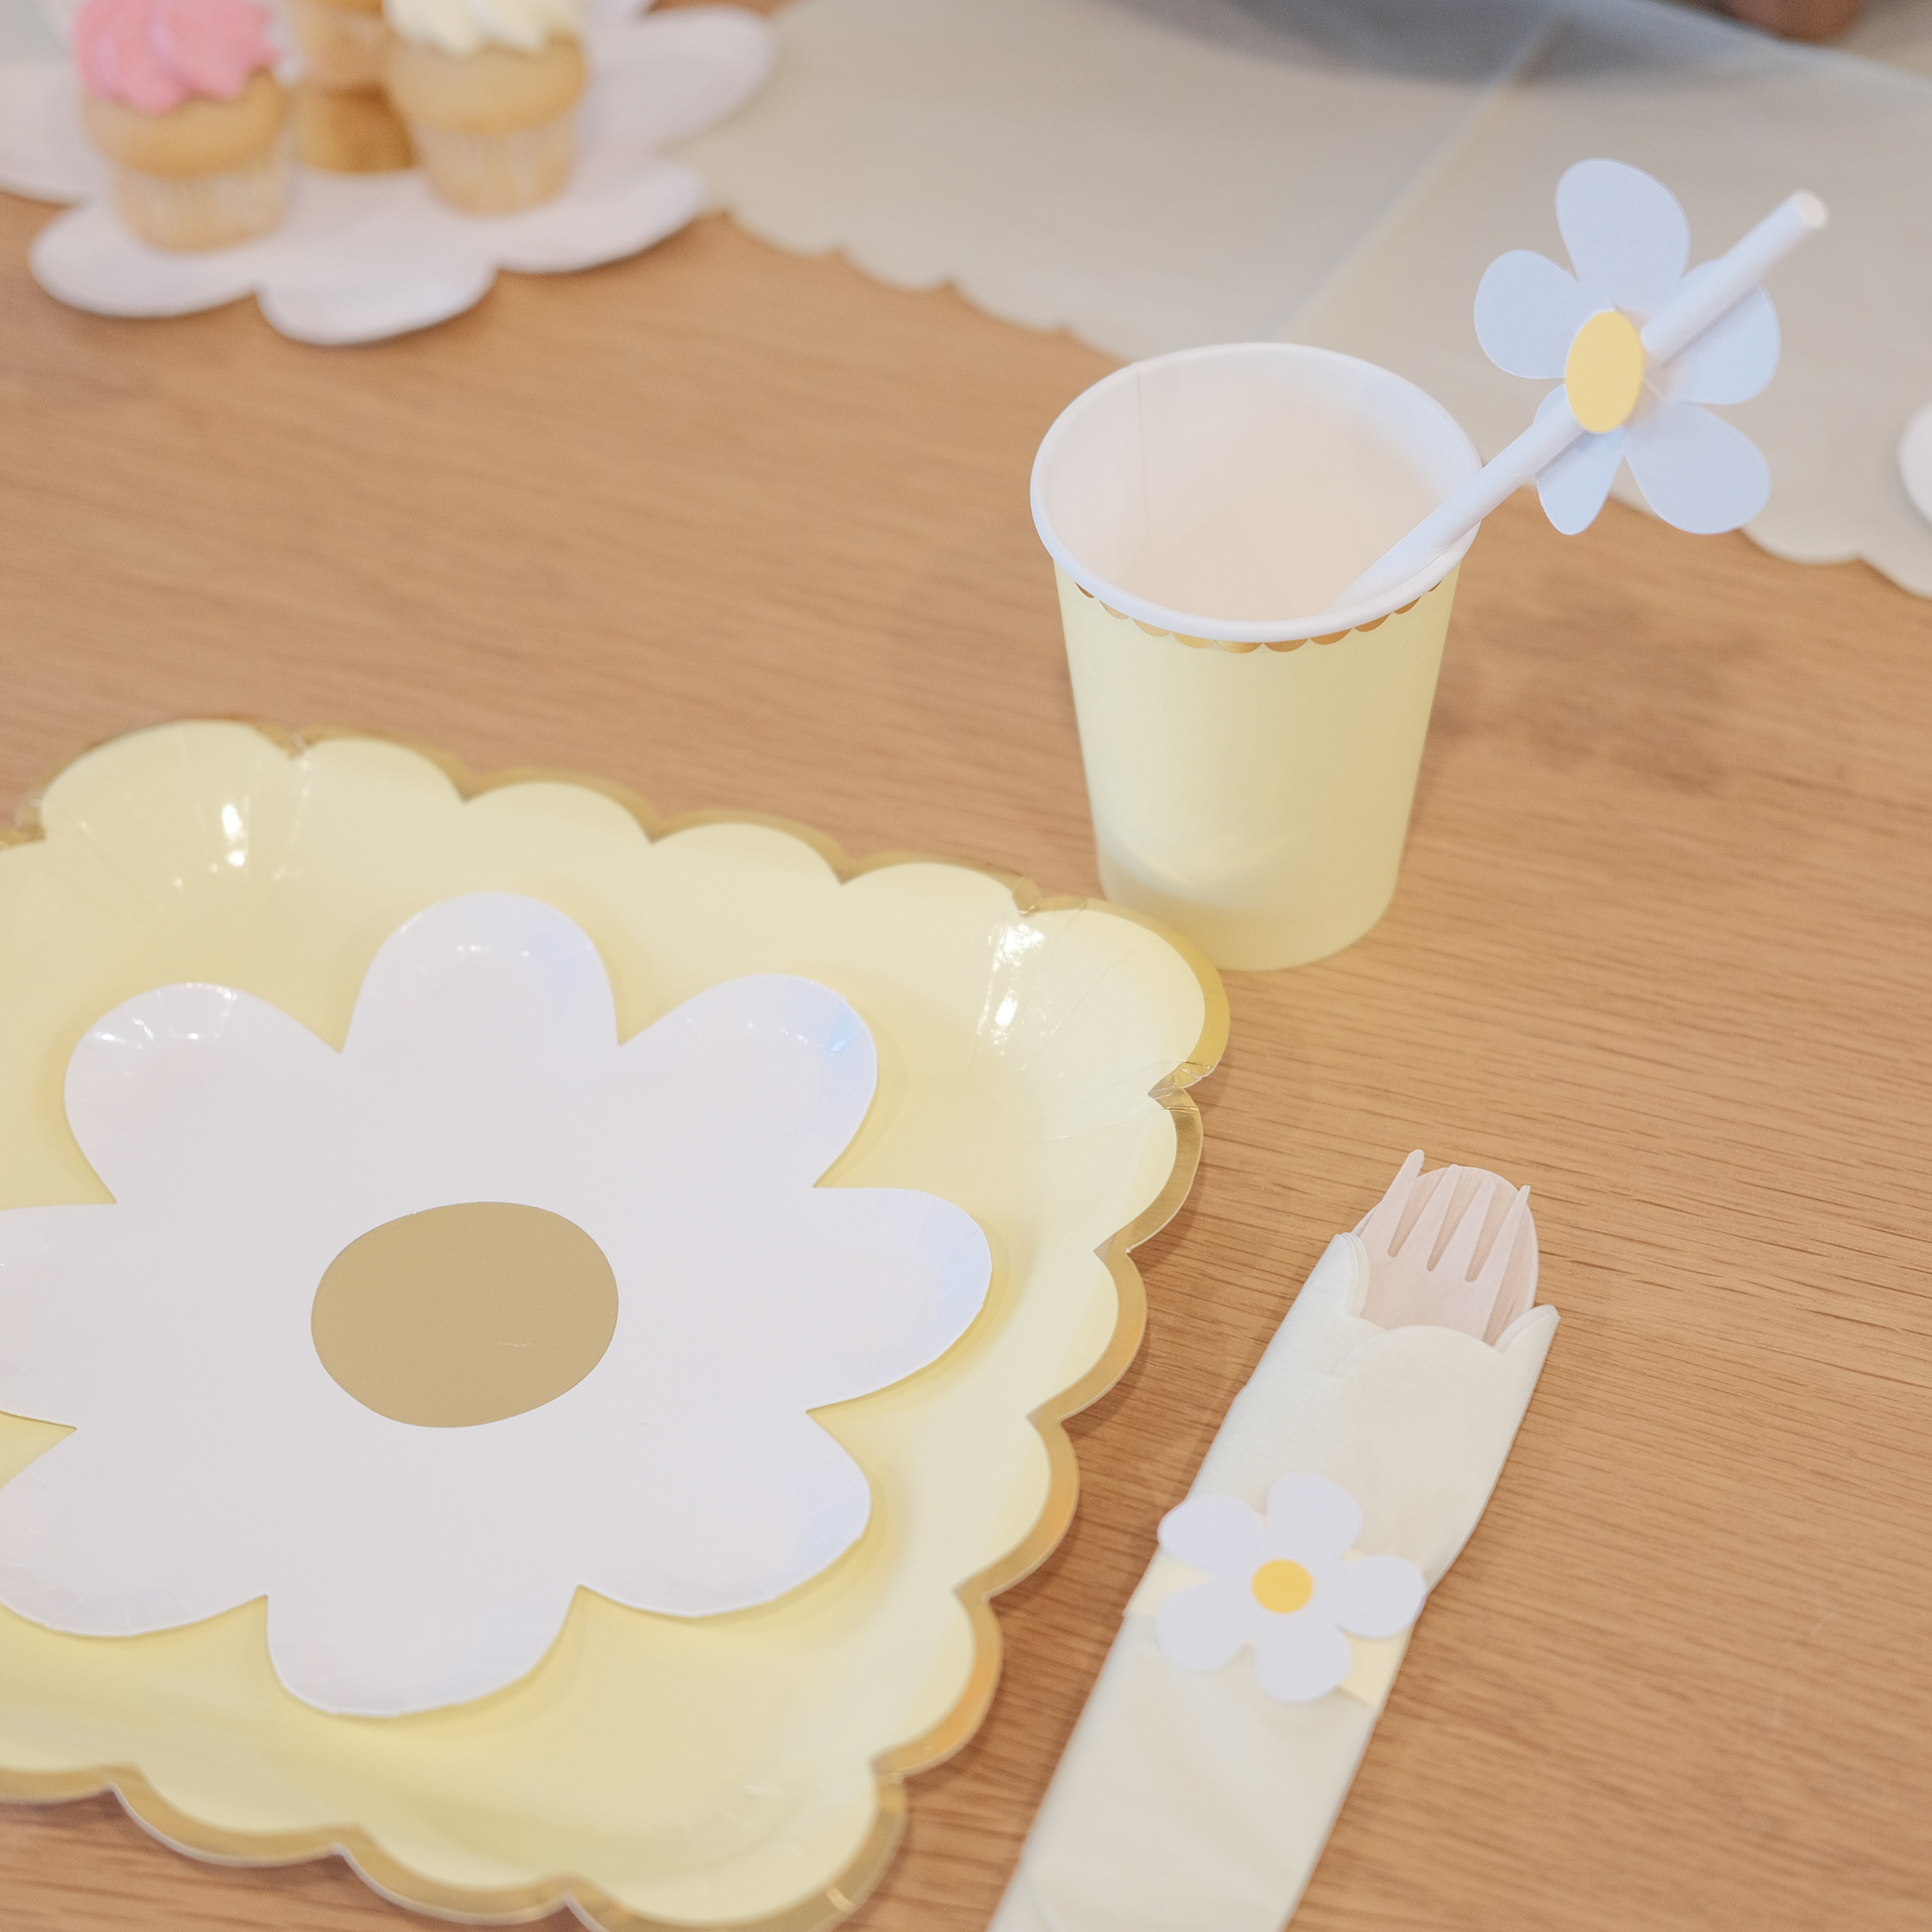 Blooming Daisy Box | Party In A Box | Bowtique Decor | Blooming daisy box contain themed party essentials for 8 guests.